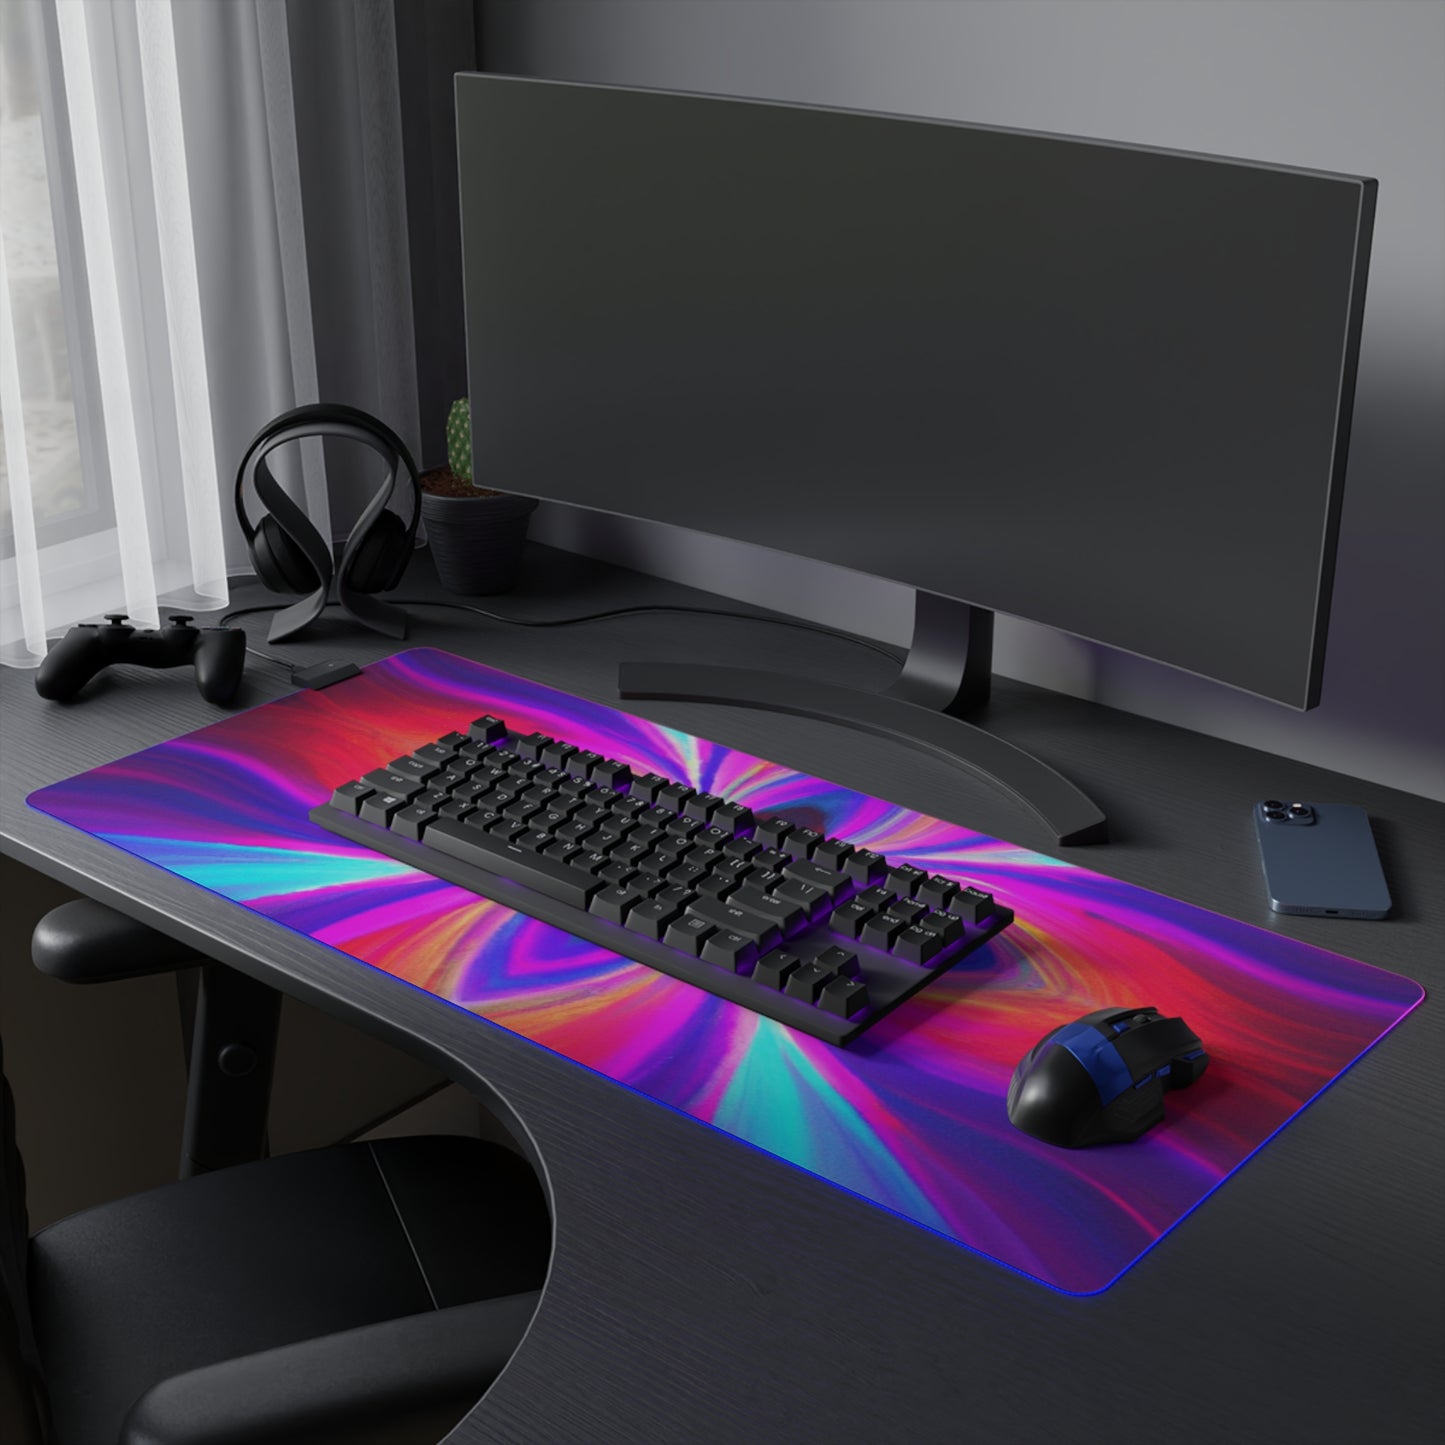 Rex Radburn - Psychedelic Trippy LED Light Up Gaming Mouse Pad